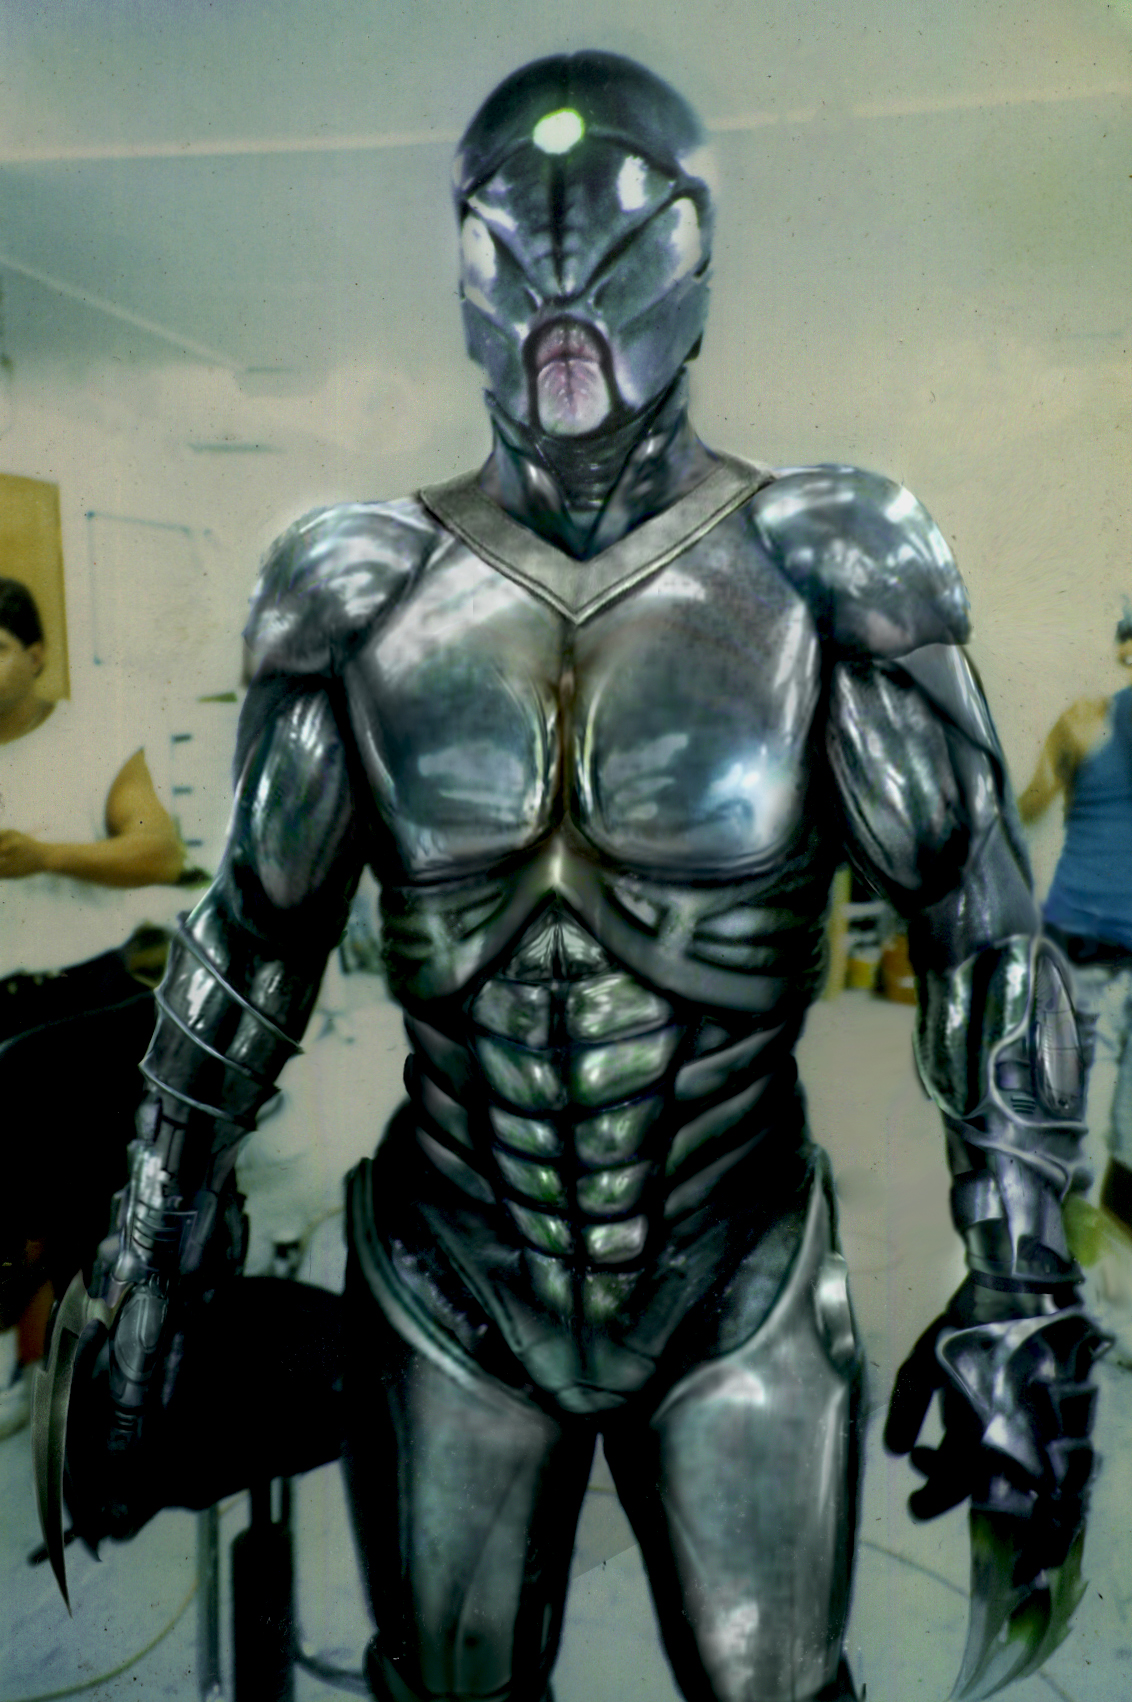 Conan, the TV series-The cavern. Full body suit designed and created by Gabriel Solana & team.